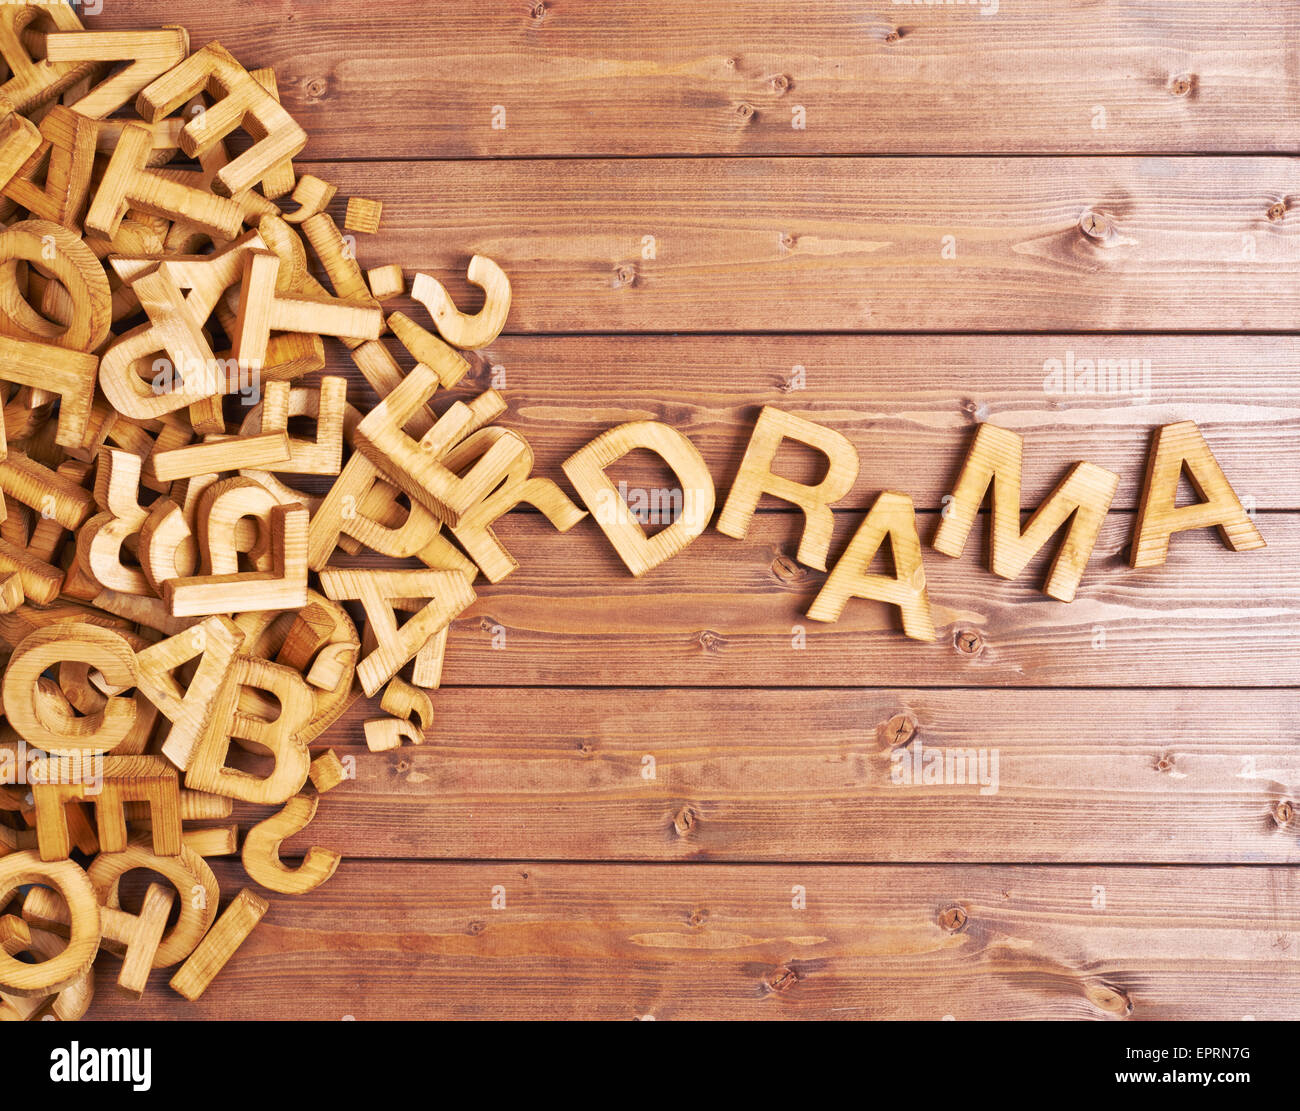 Word drama made with wooden letters Stock Photo